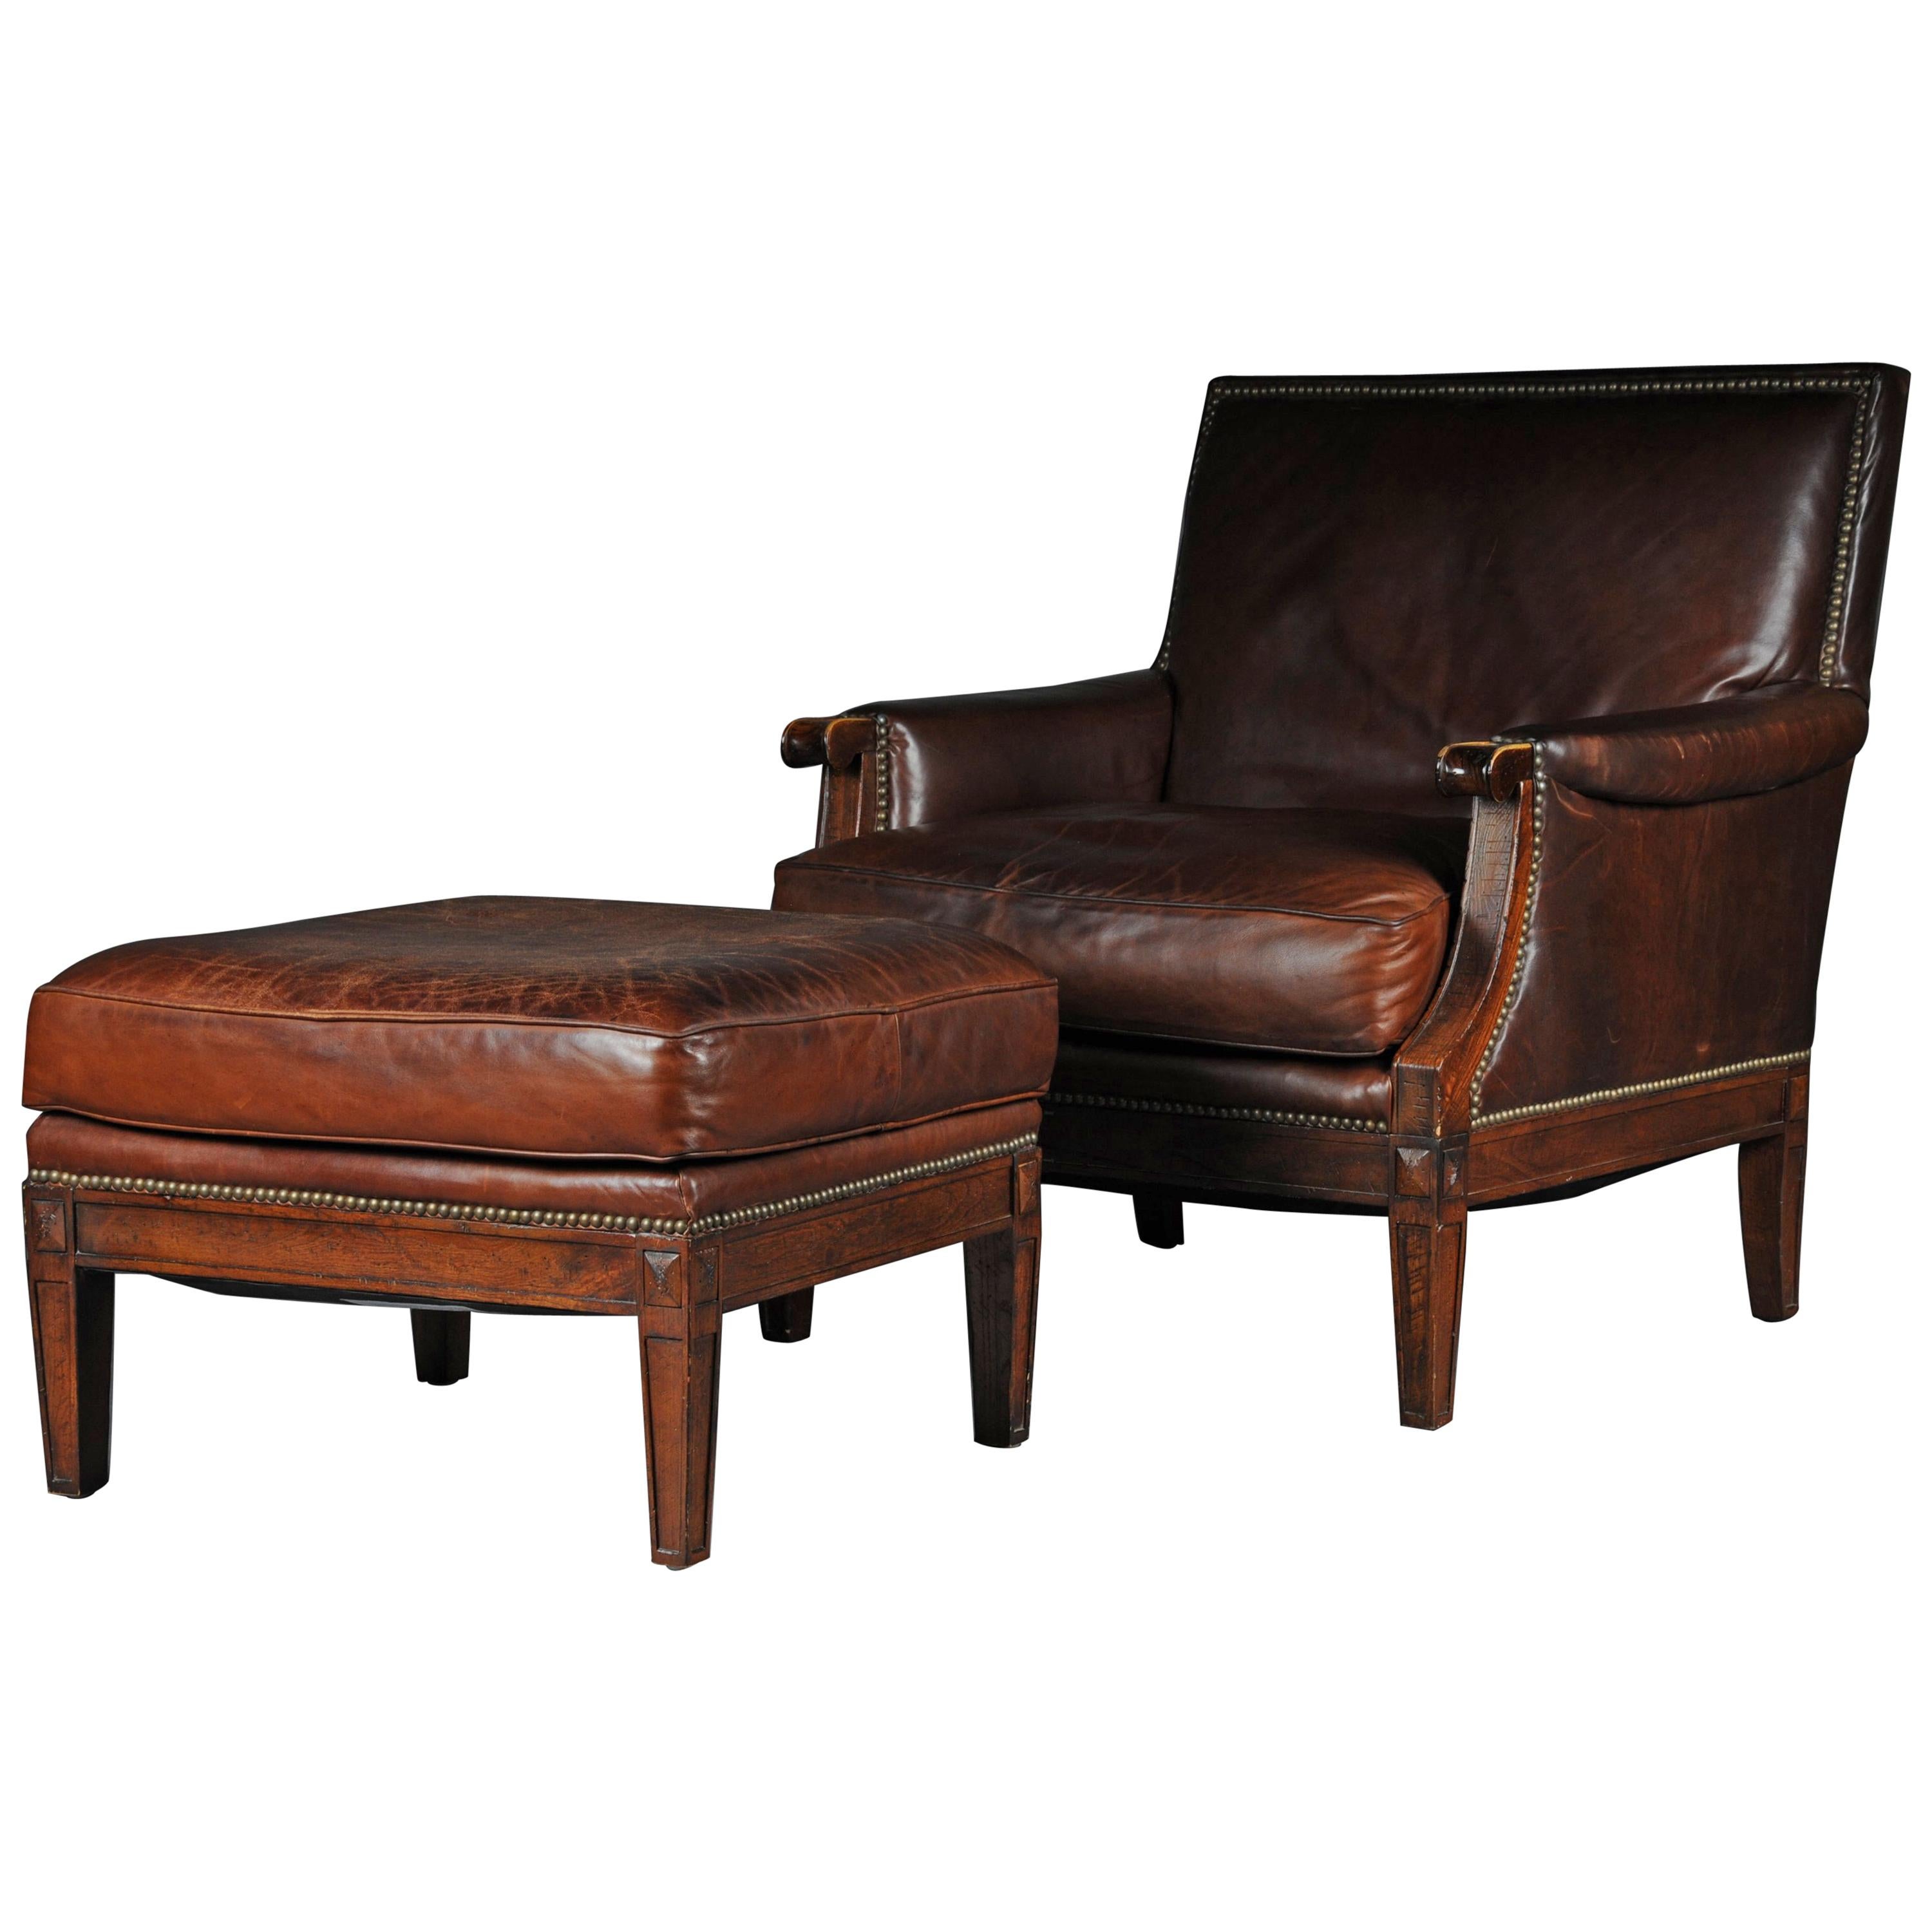 Classic English Club Chair with Footstool, Leather